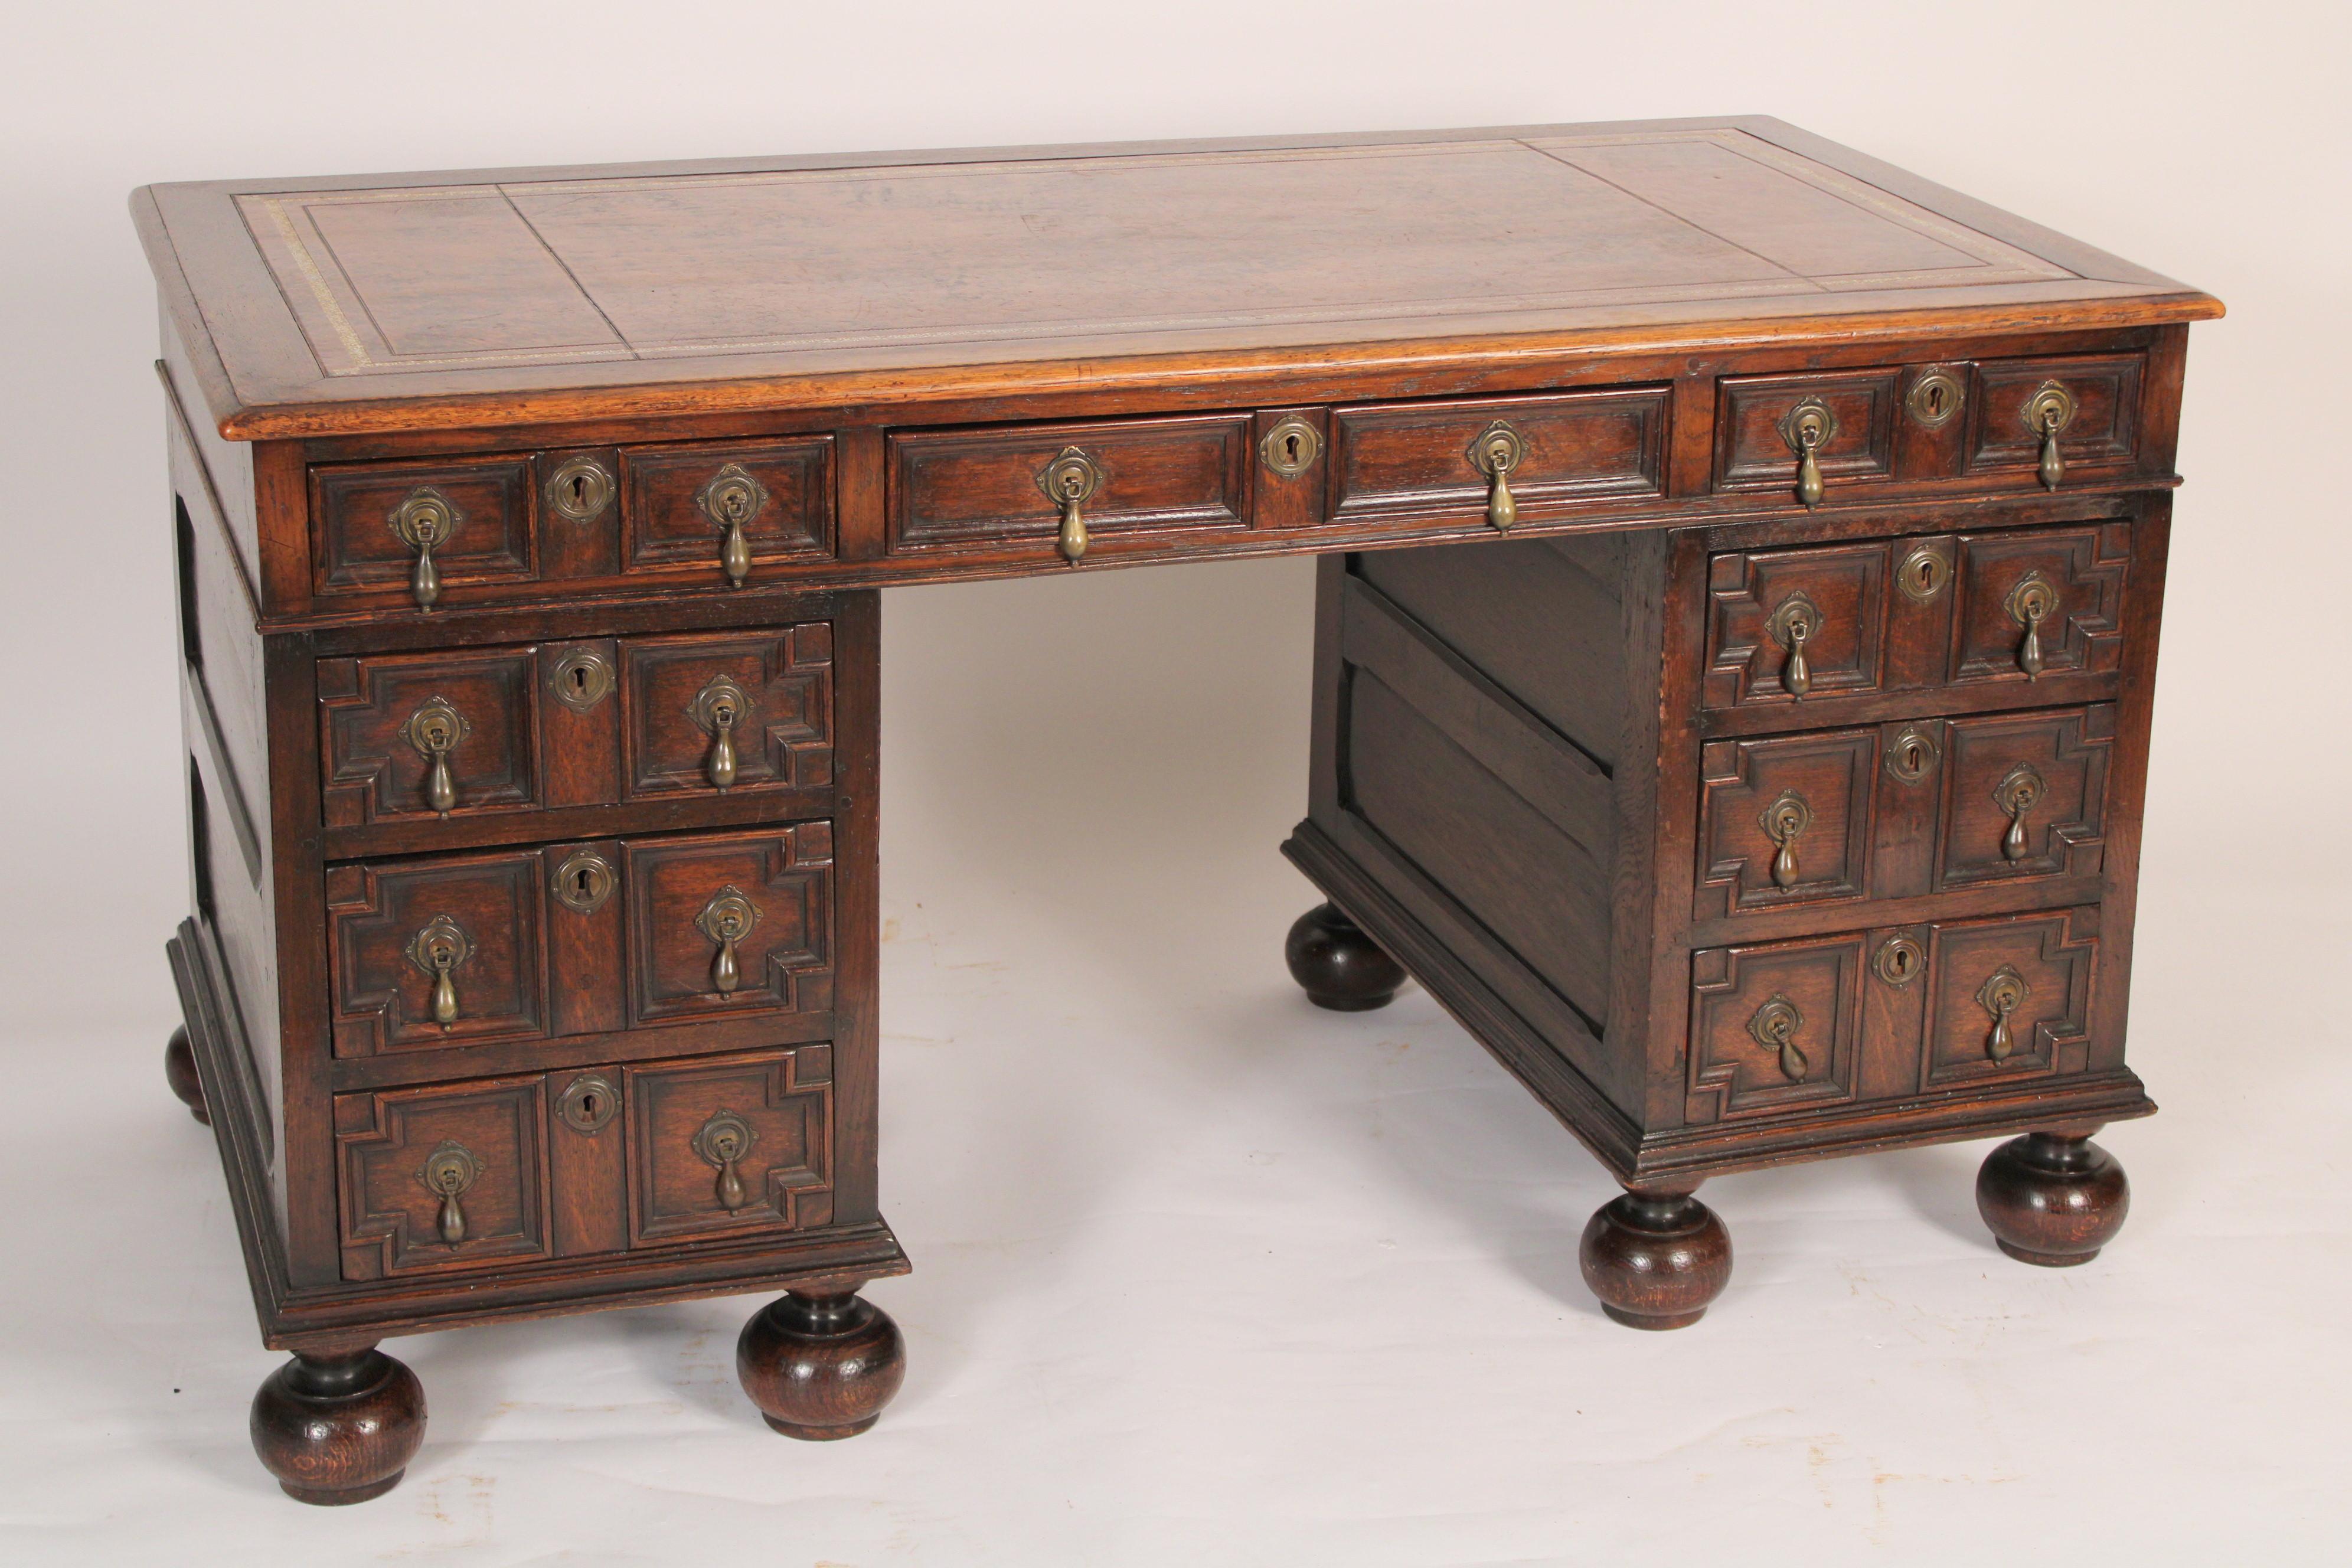 Charles II style oak double pedestal desk with a tooled leather top, circa 1920's. With a very nice old rectangular tooled leather top, 3 frieze drawers and two pedestals with 3 drawers each resting on ball feet. Wood has nice color, exceptional